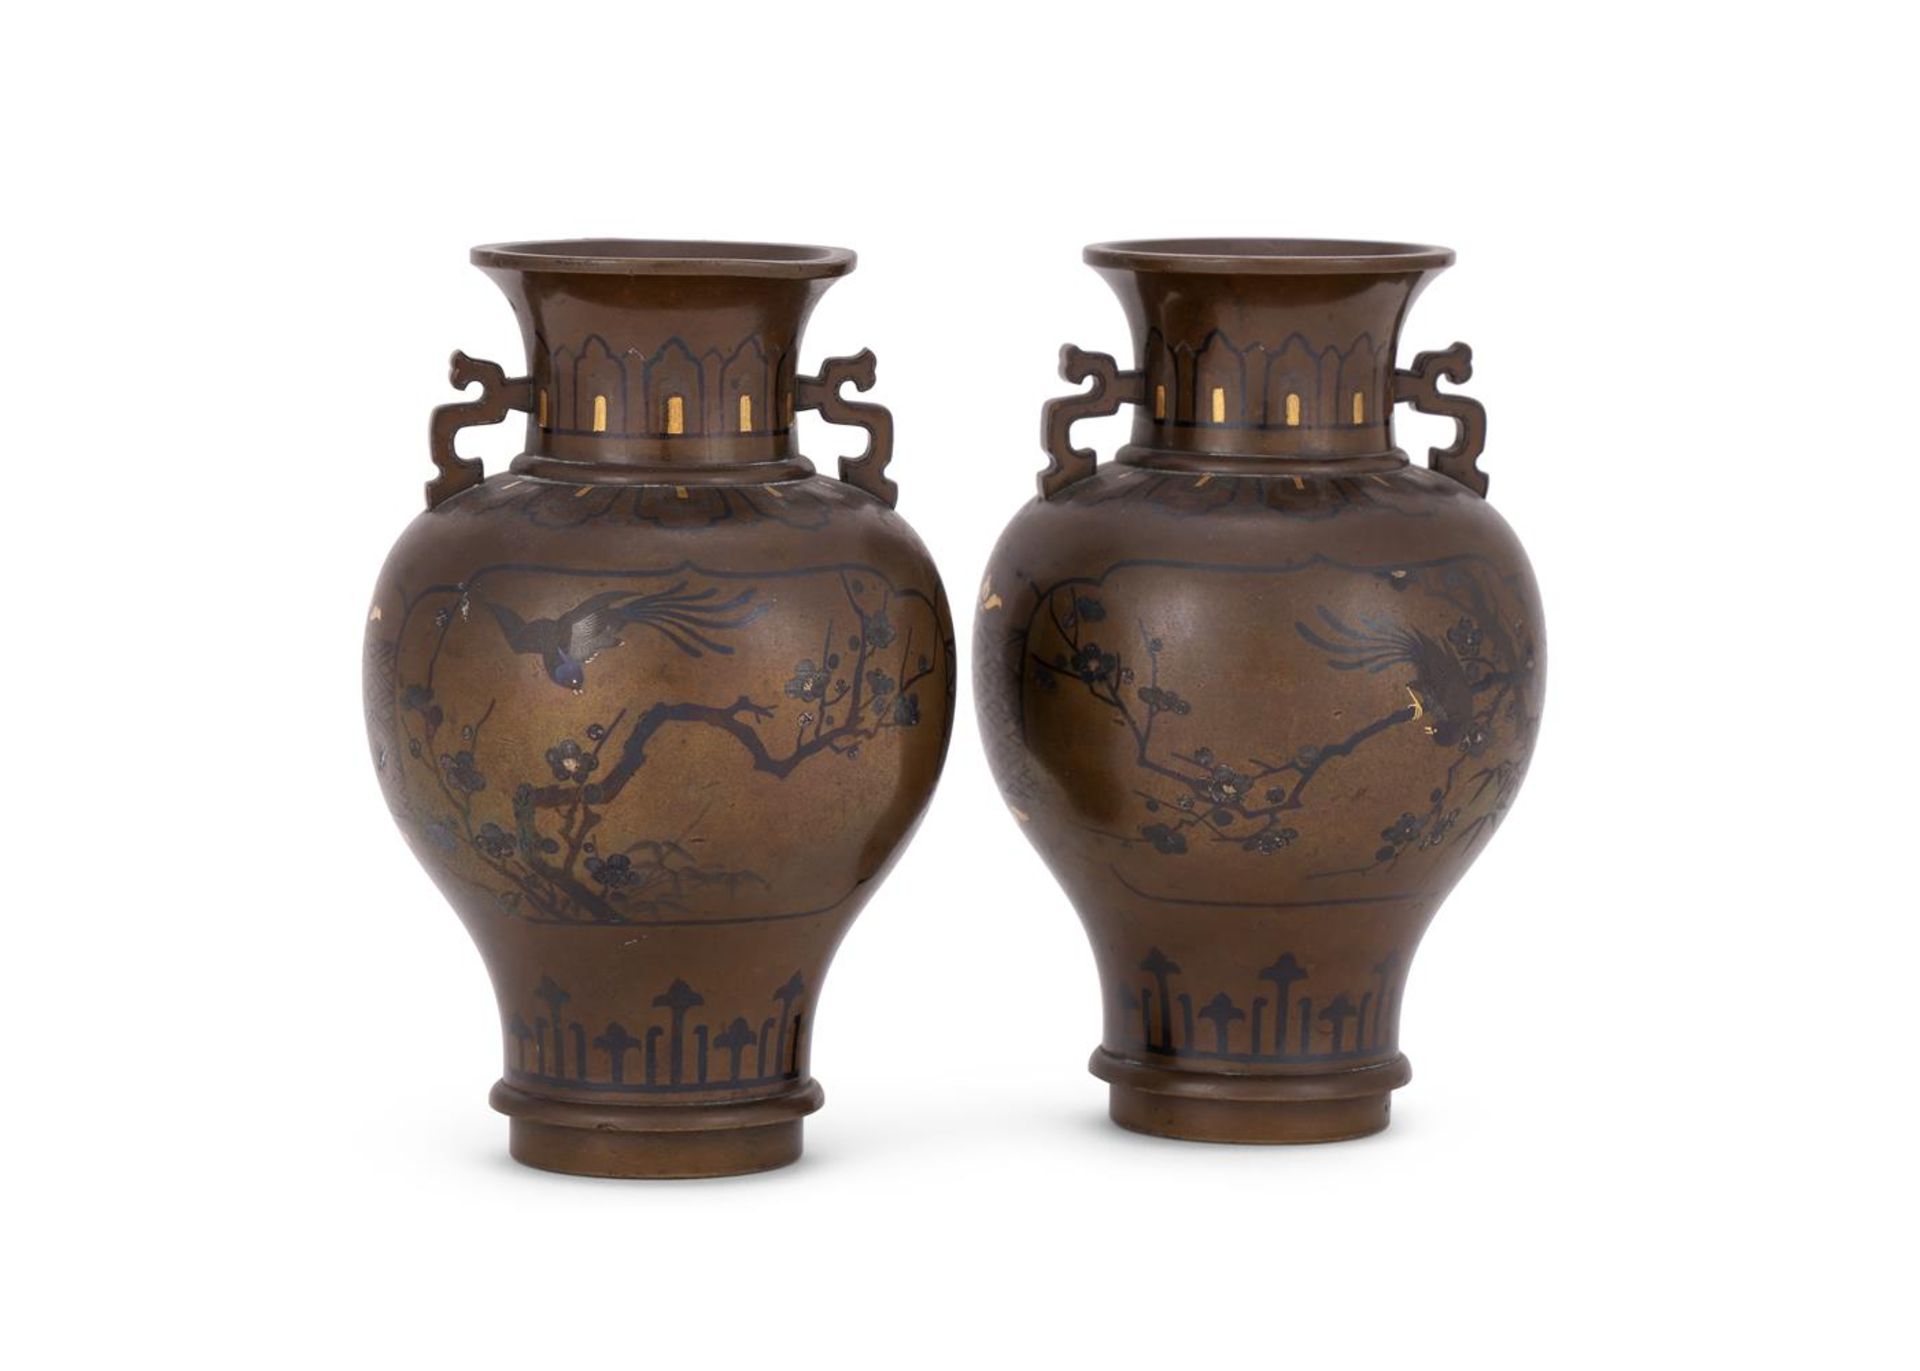 NOGAWA COMPANY, A PAIR OF JAPANESE INLAID BRONZE VASES - Image 2 of 3